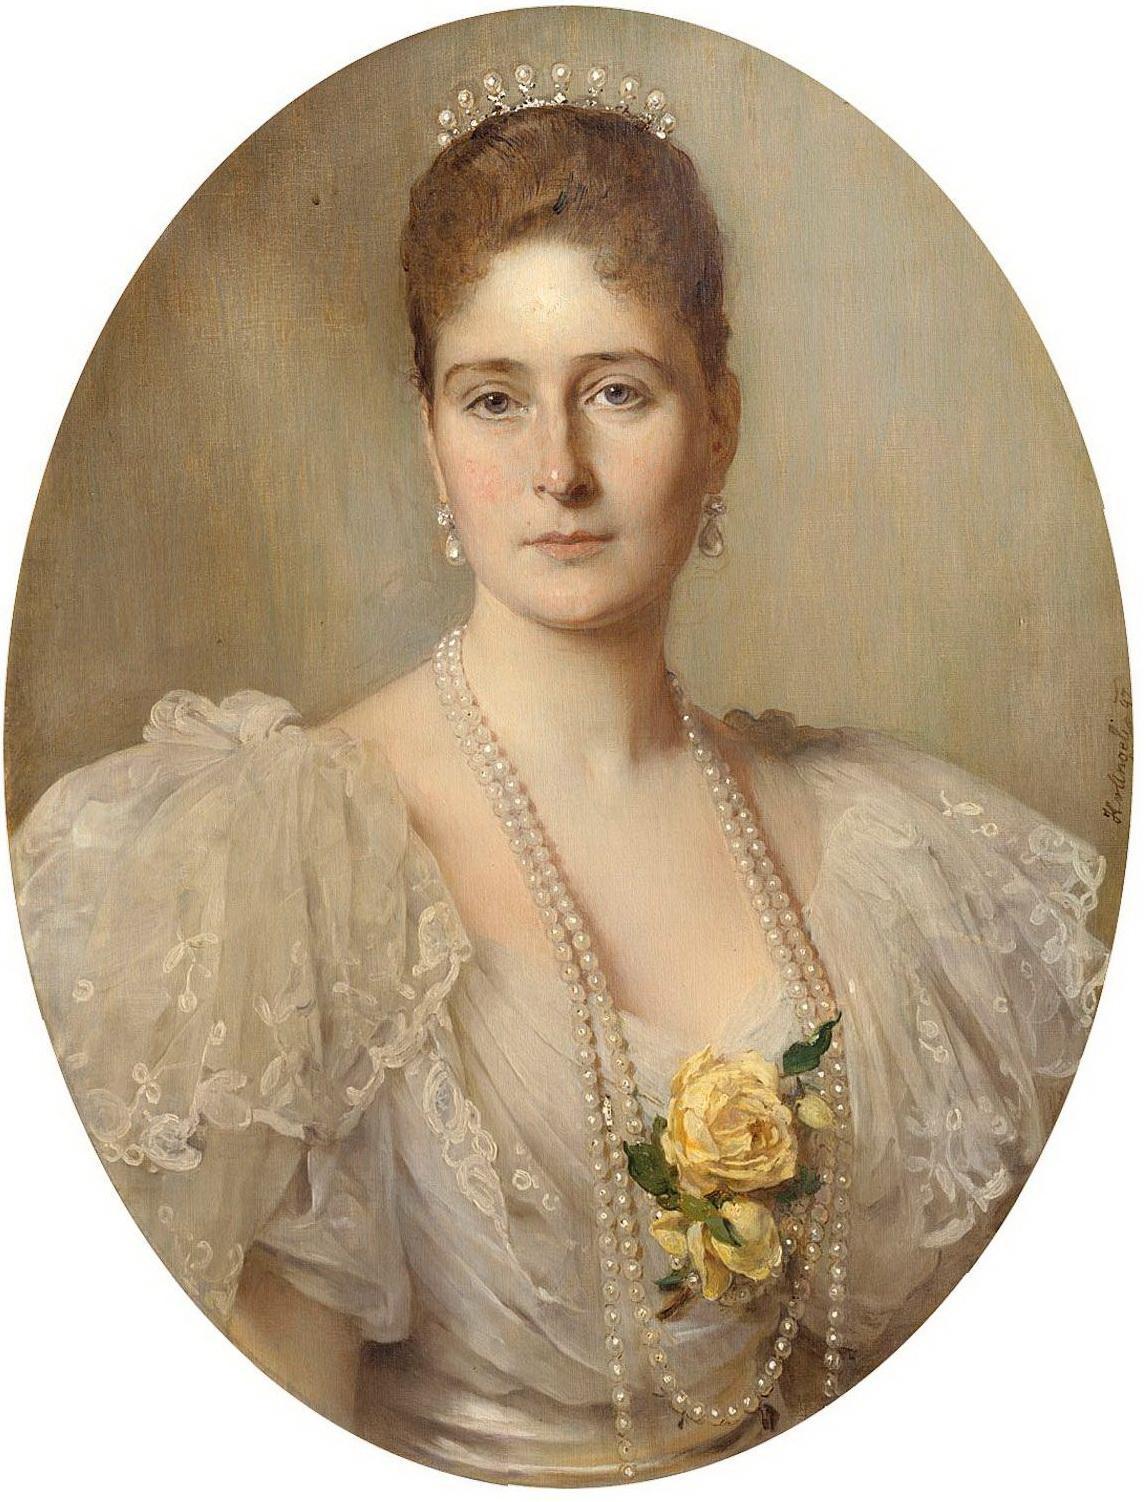 Alix of Hesse, 6th of June 1872